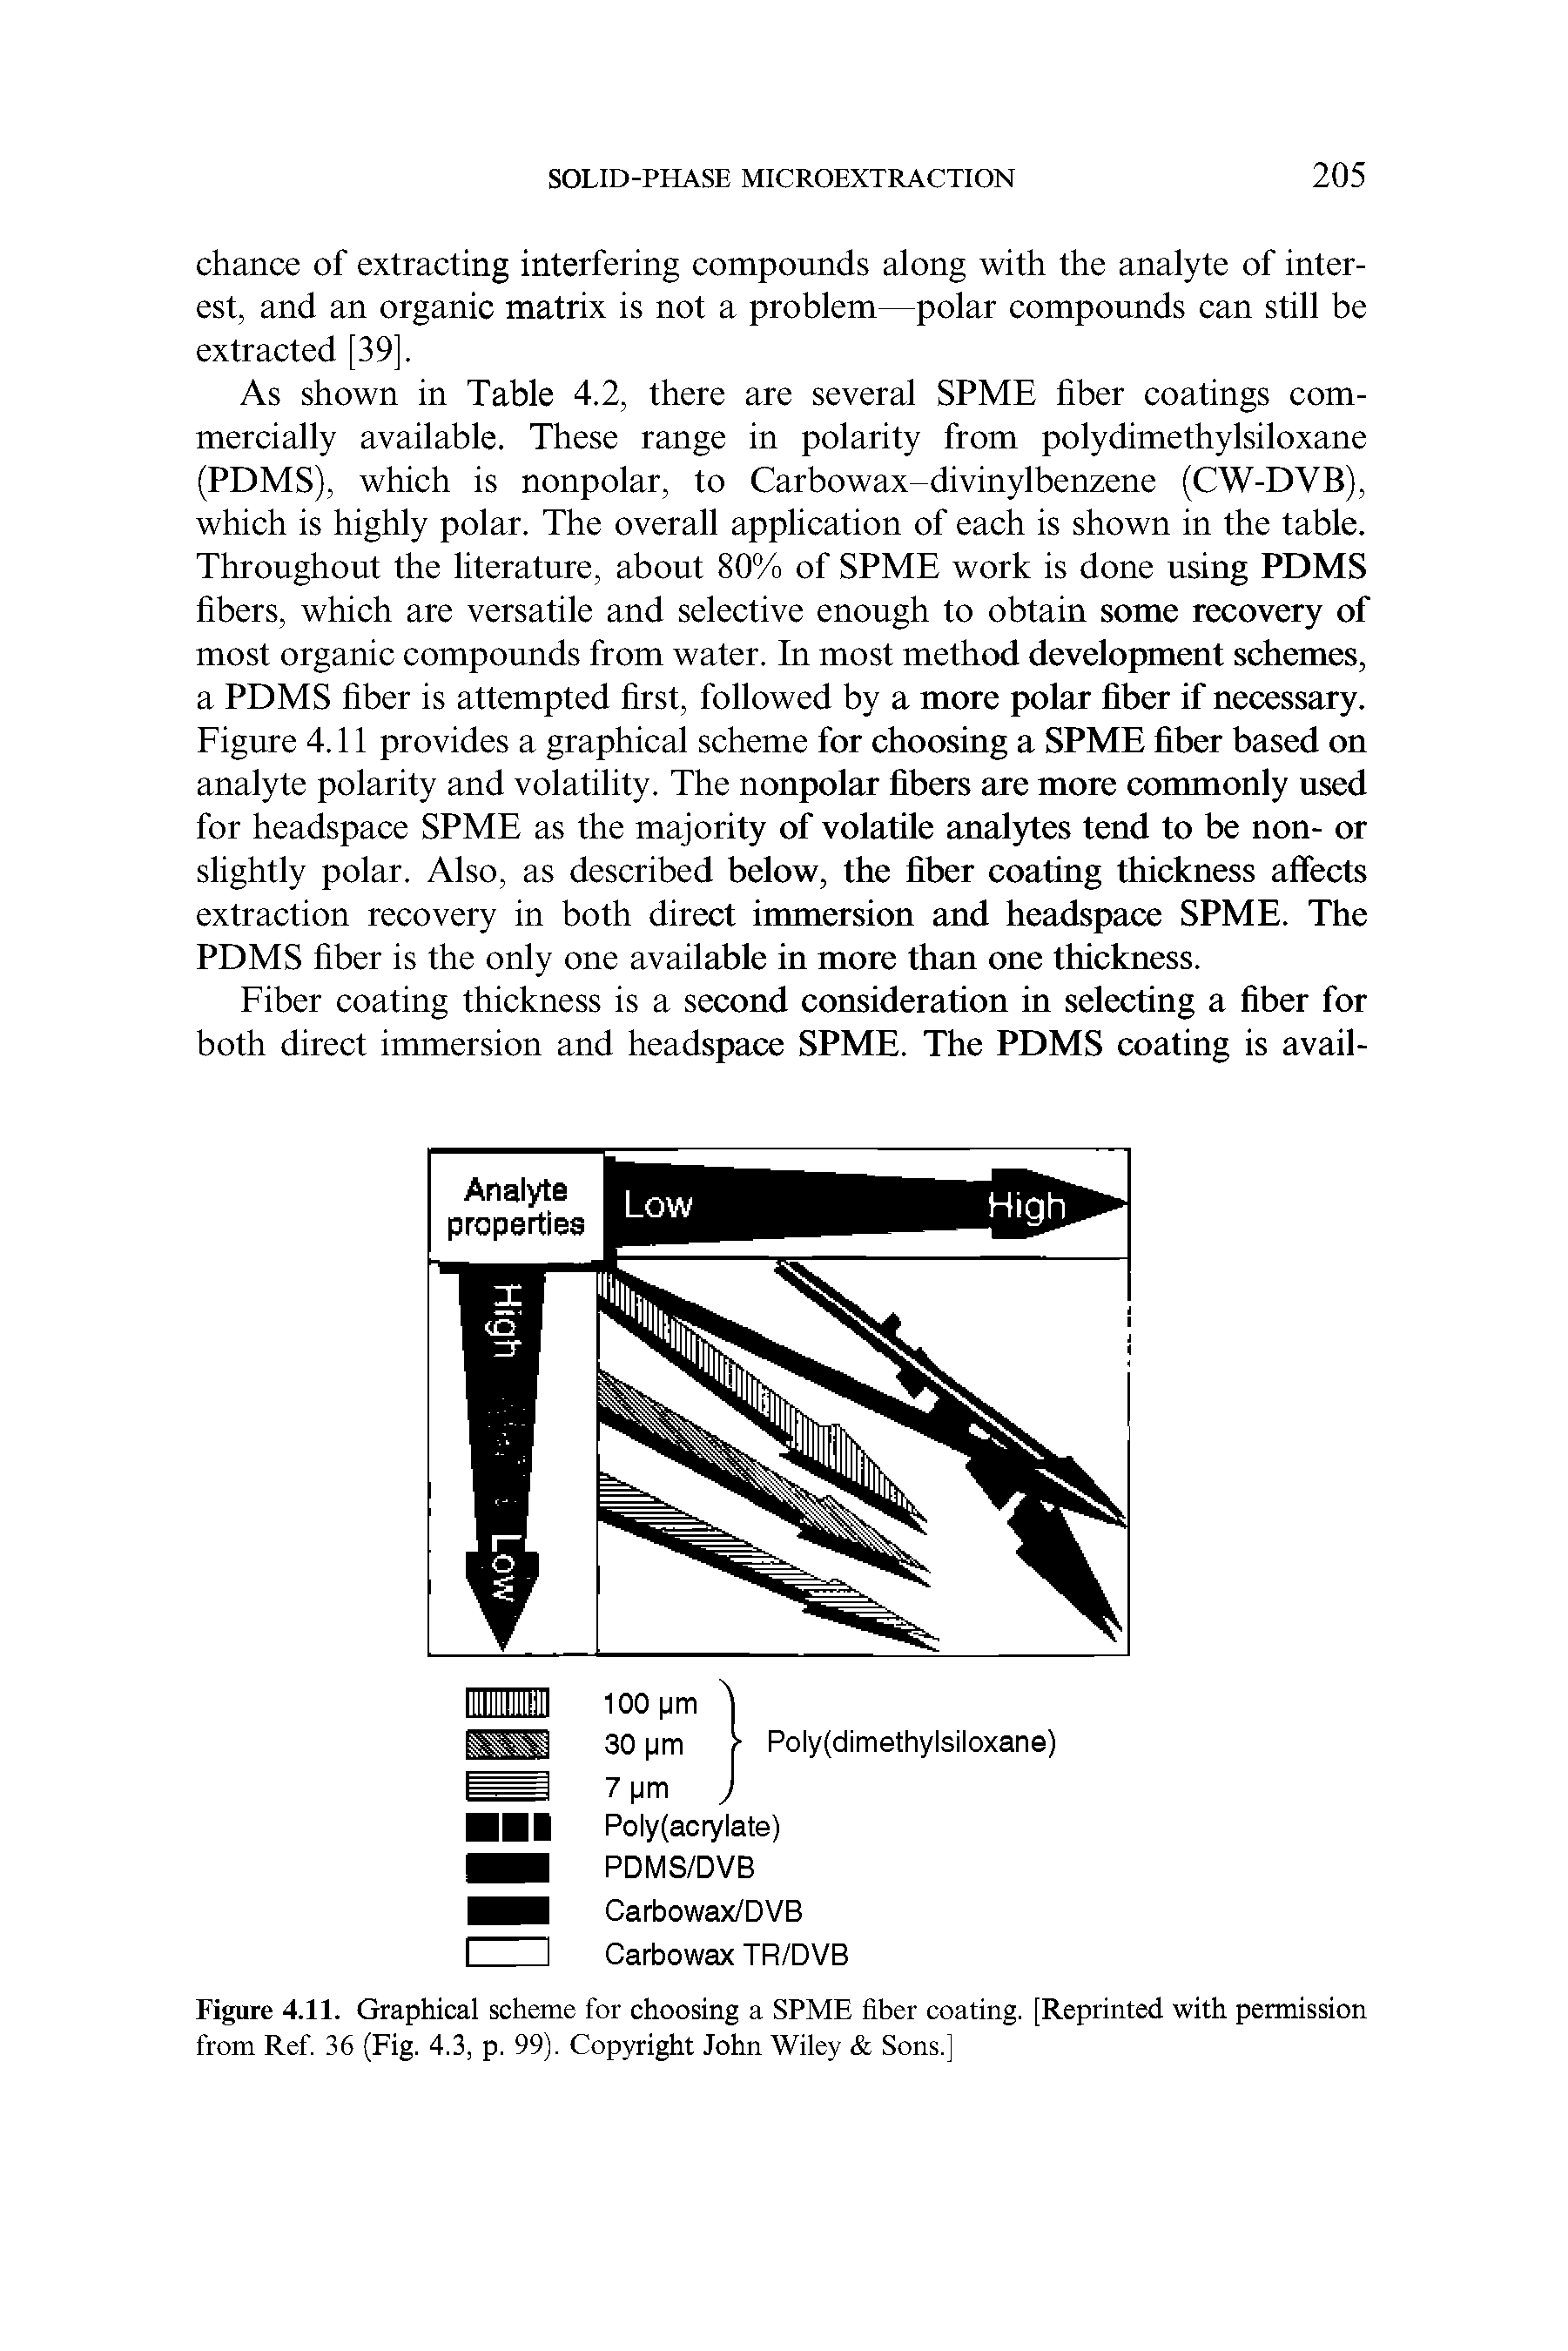 Figure 4.11. Graphical scheme for choosing a SPME fiber coating. [Reprinted with permission from Ref. 36 (Fig. 4.3, p. 99). Copyright John Wiley Sons.]...